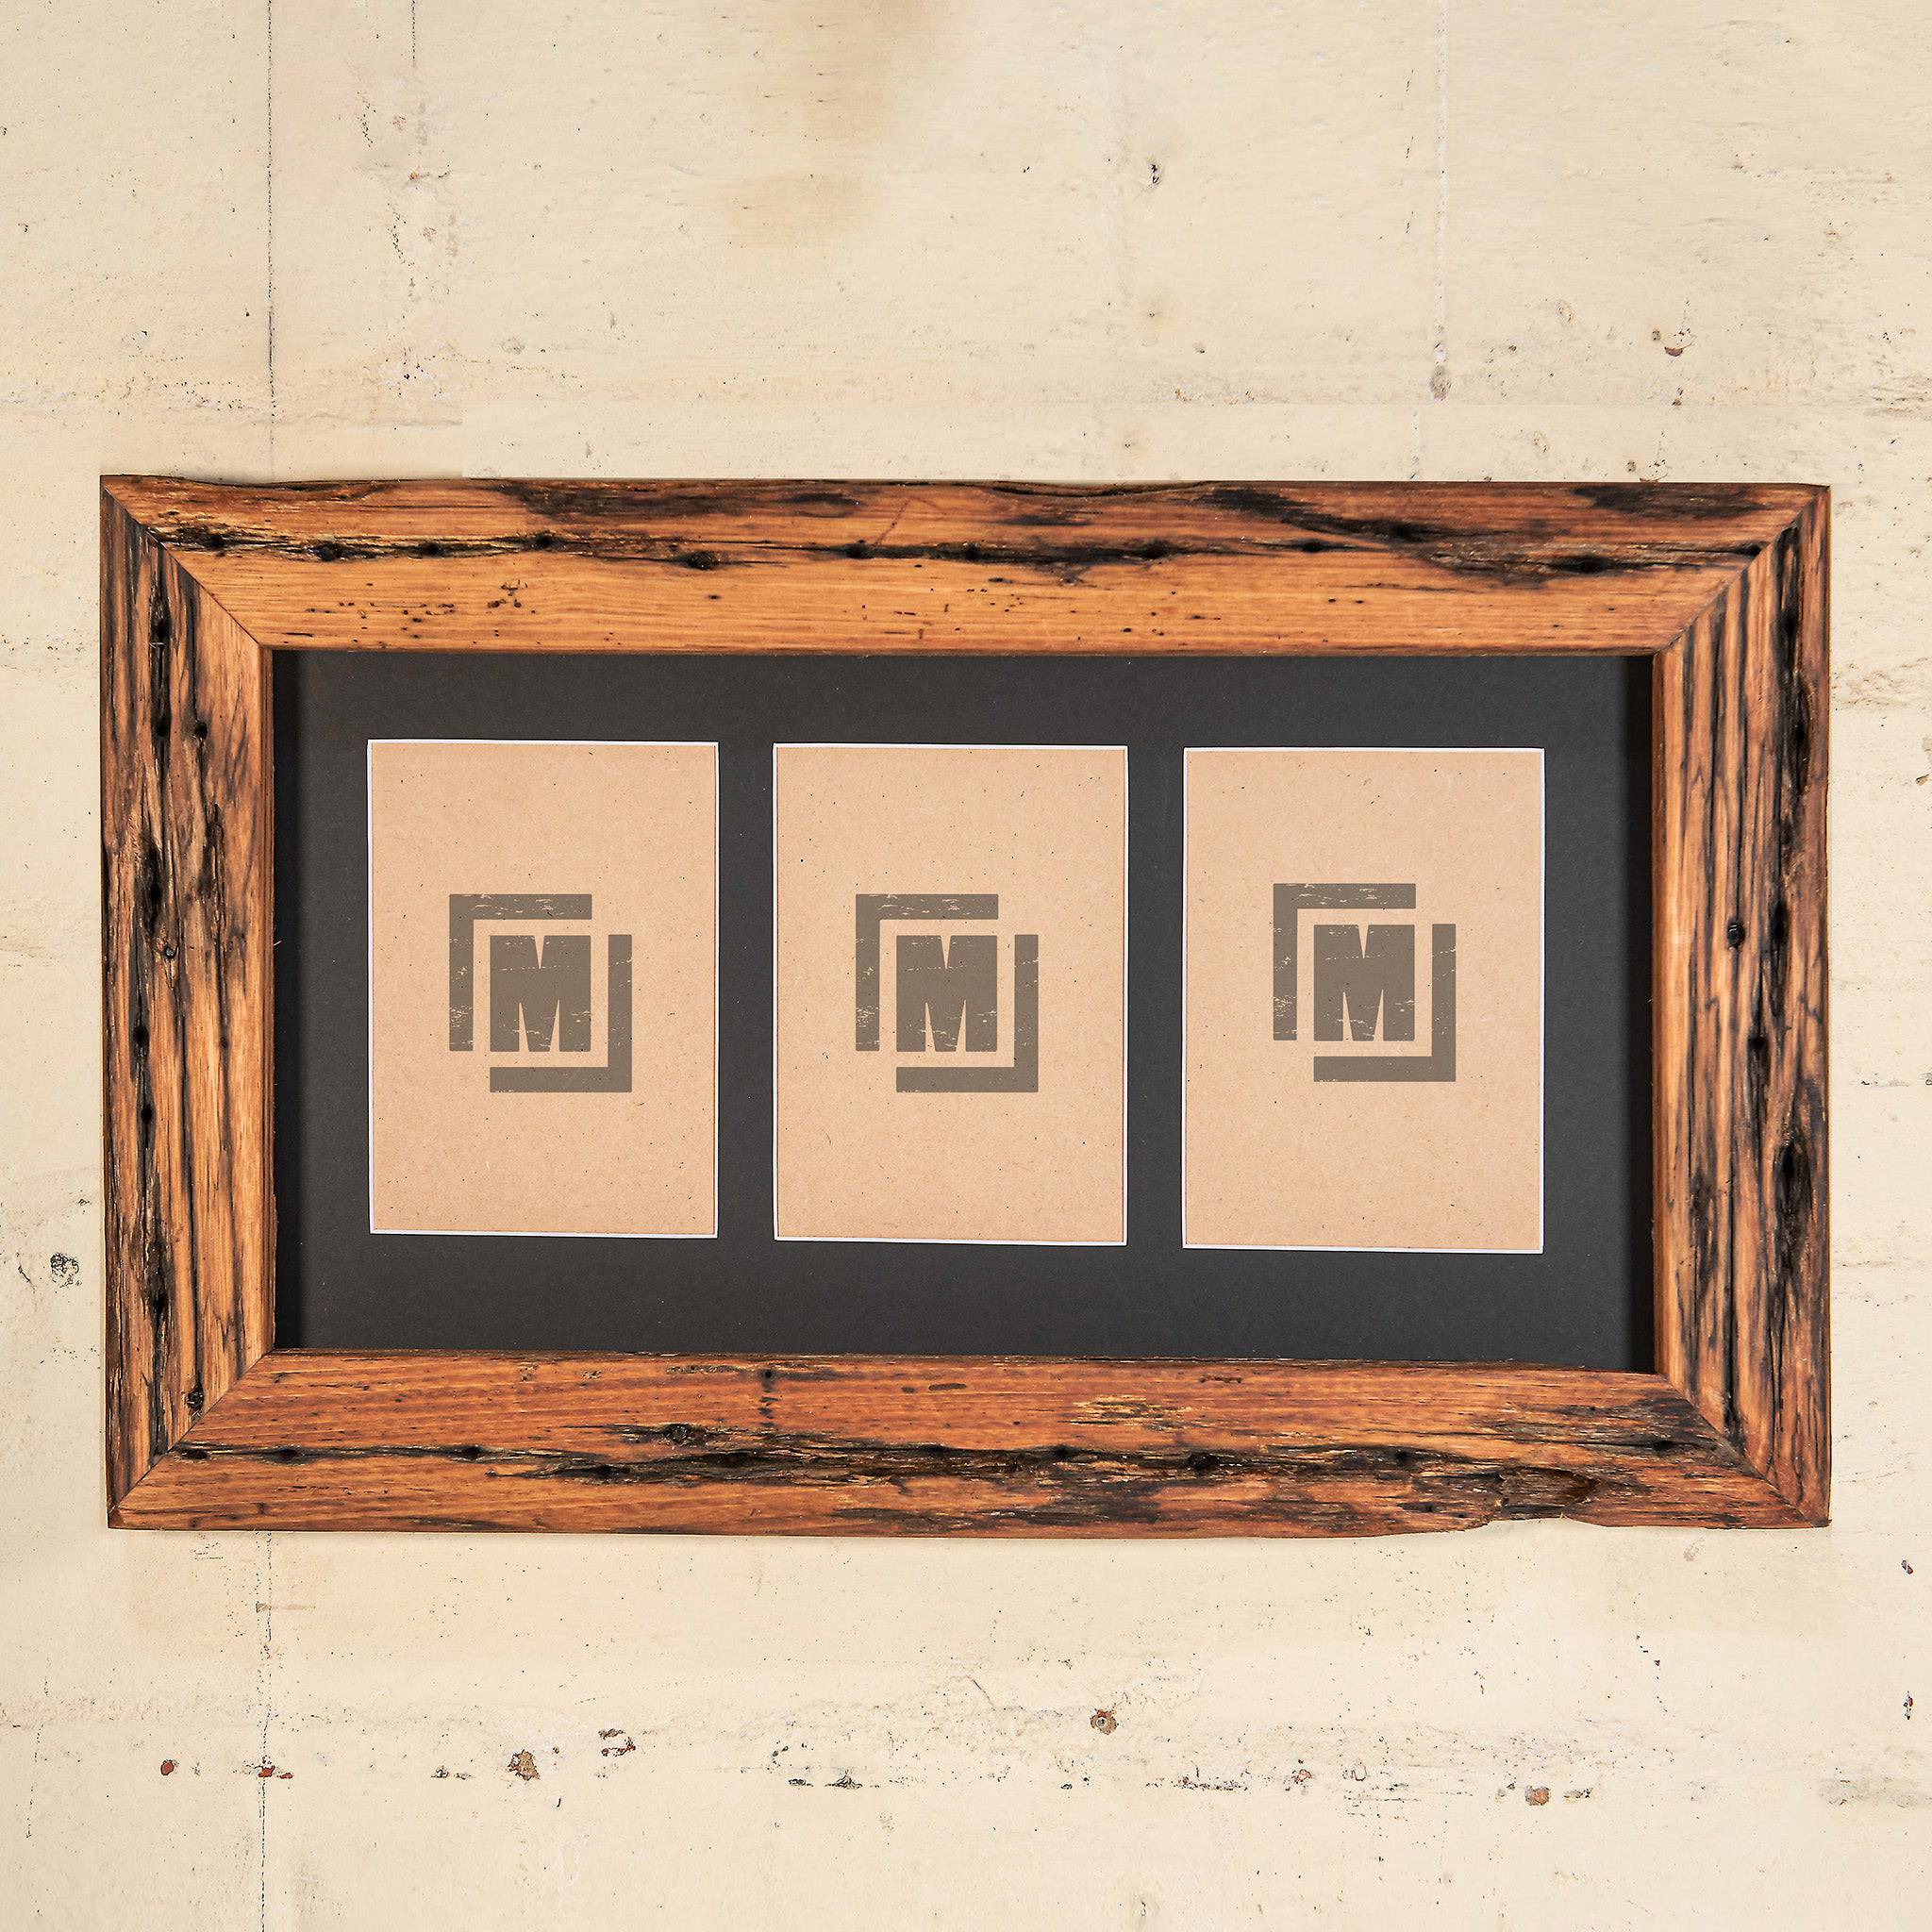 Weathered timber photo frame with lots of timber grain, showing 3 photos with a black border. 